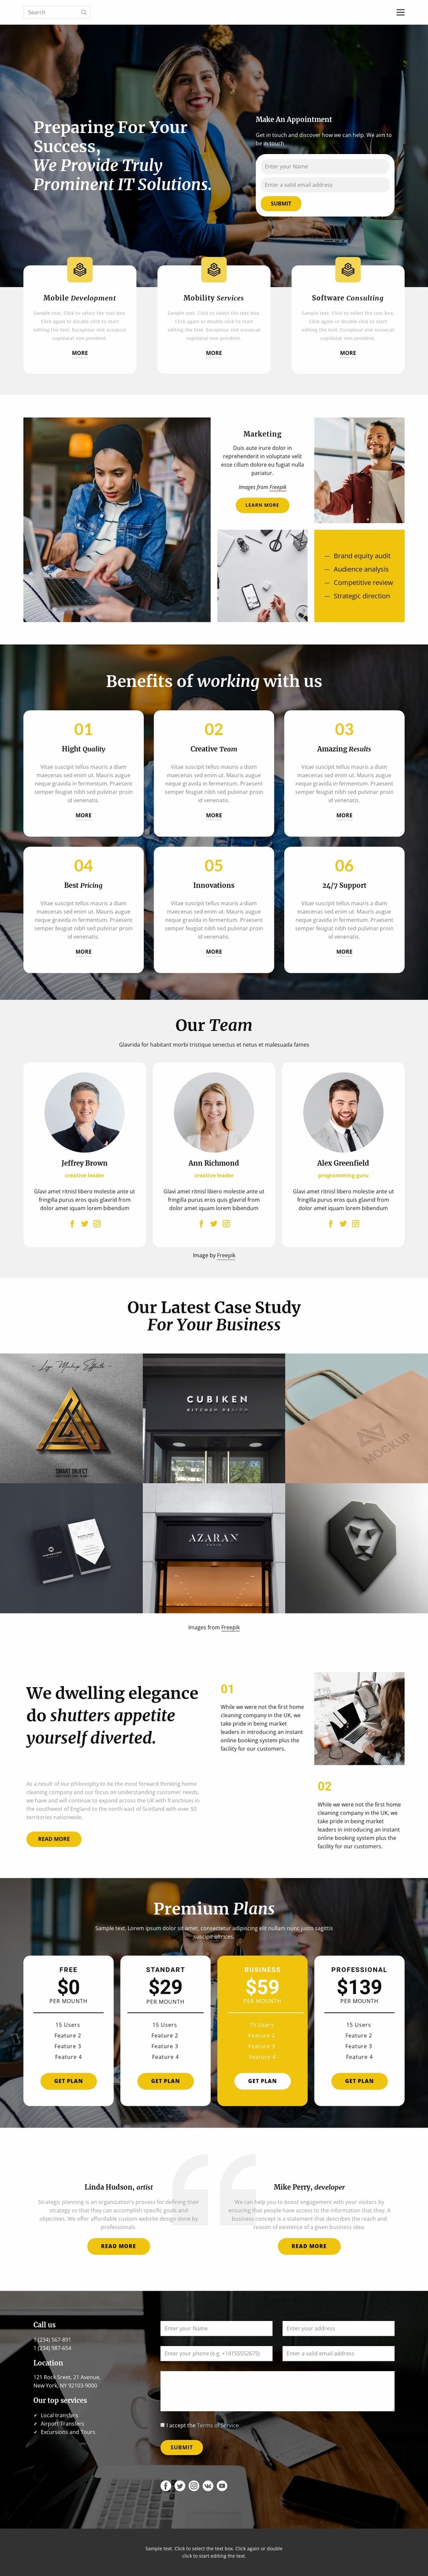 Joint-stock company Website Design